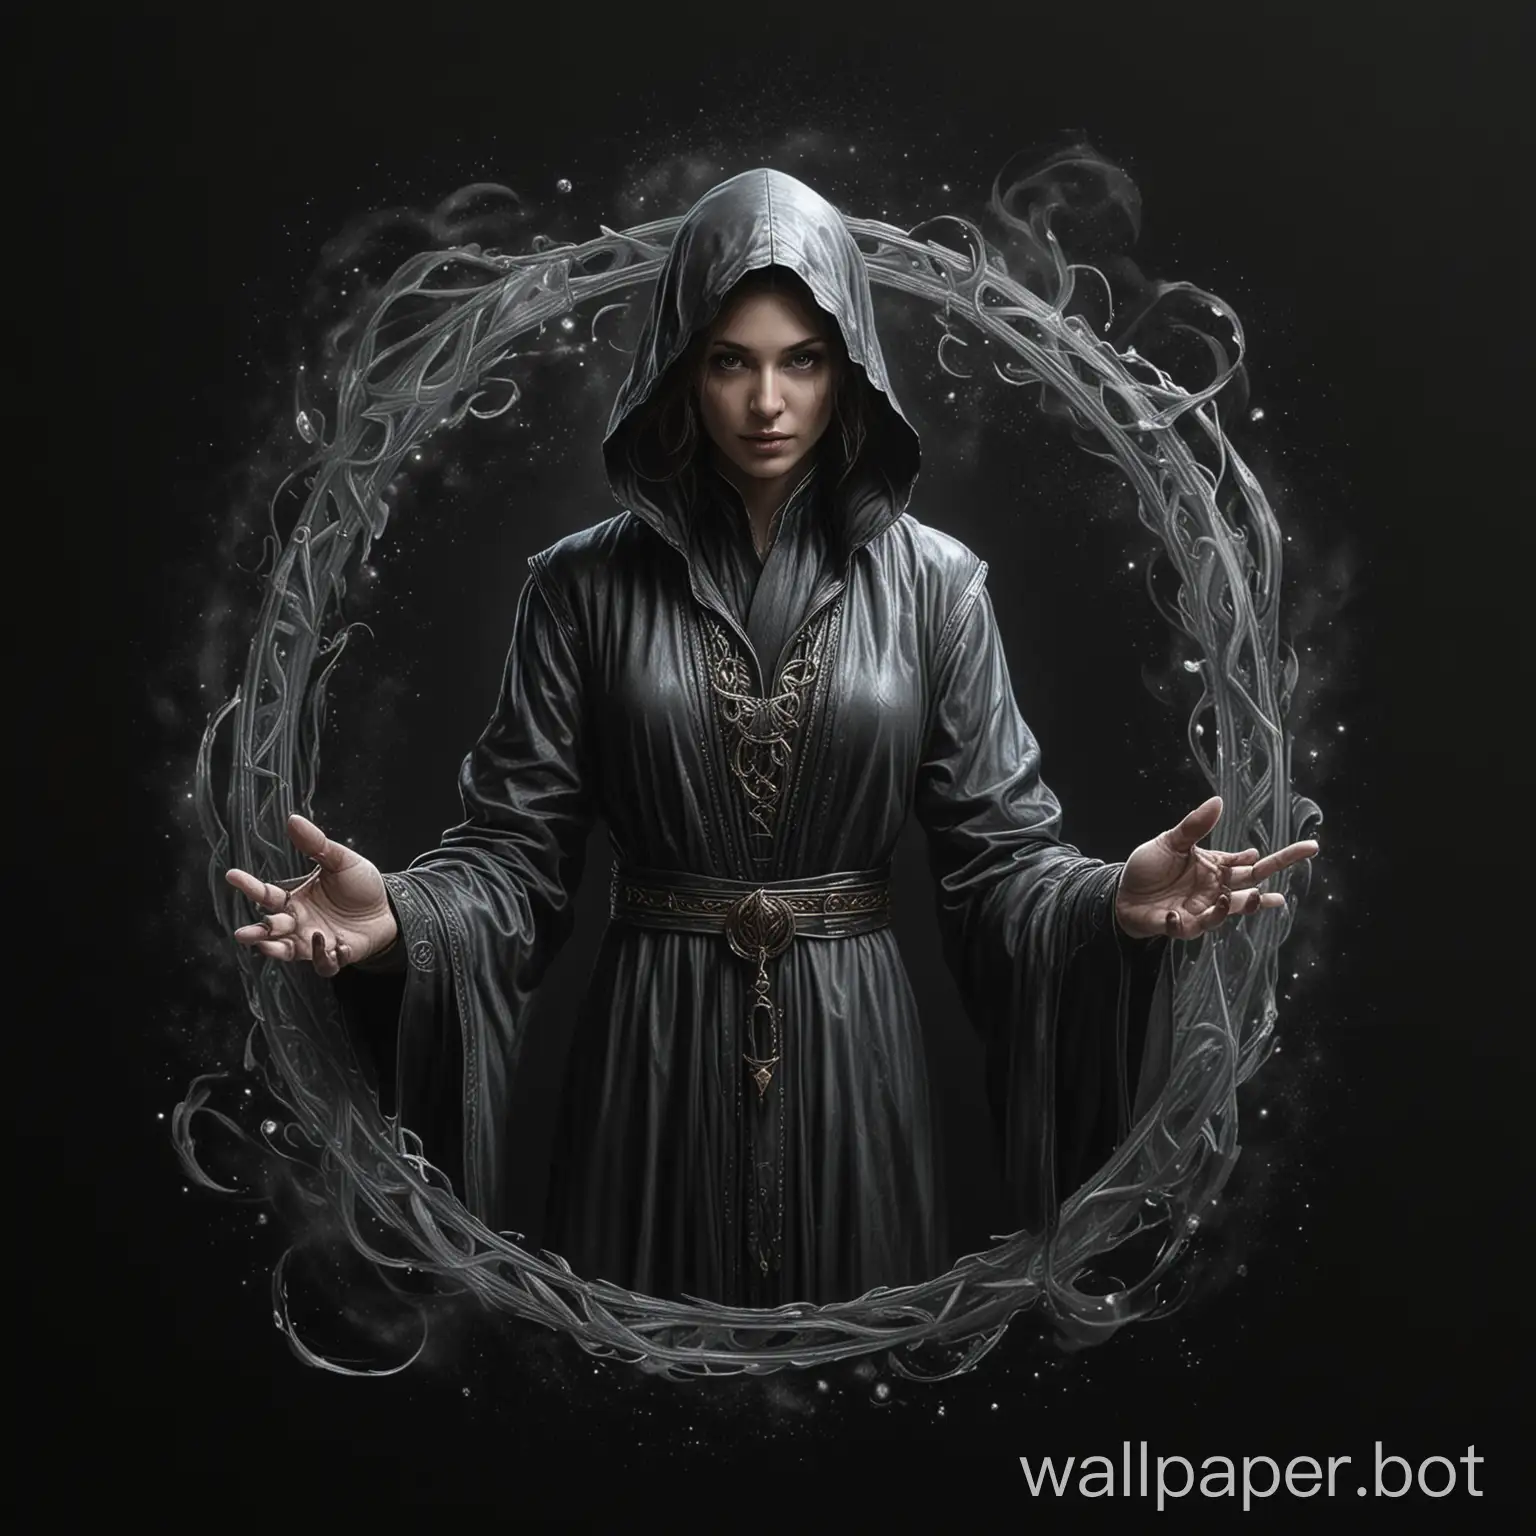 Draw a realistic fantasy master of illusions on a black background.